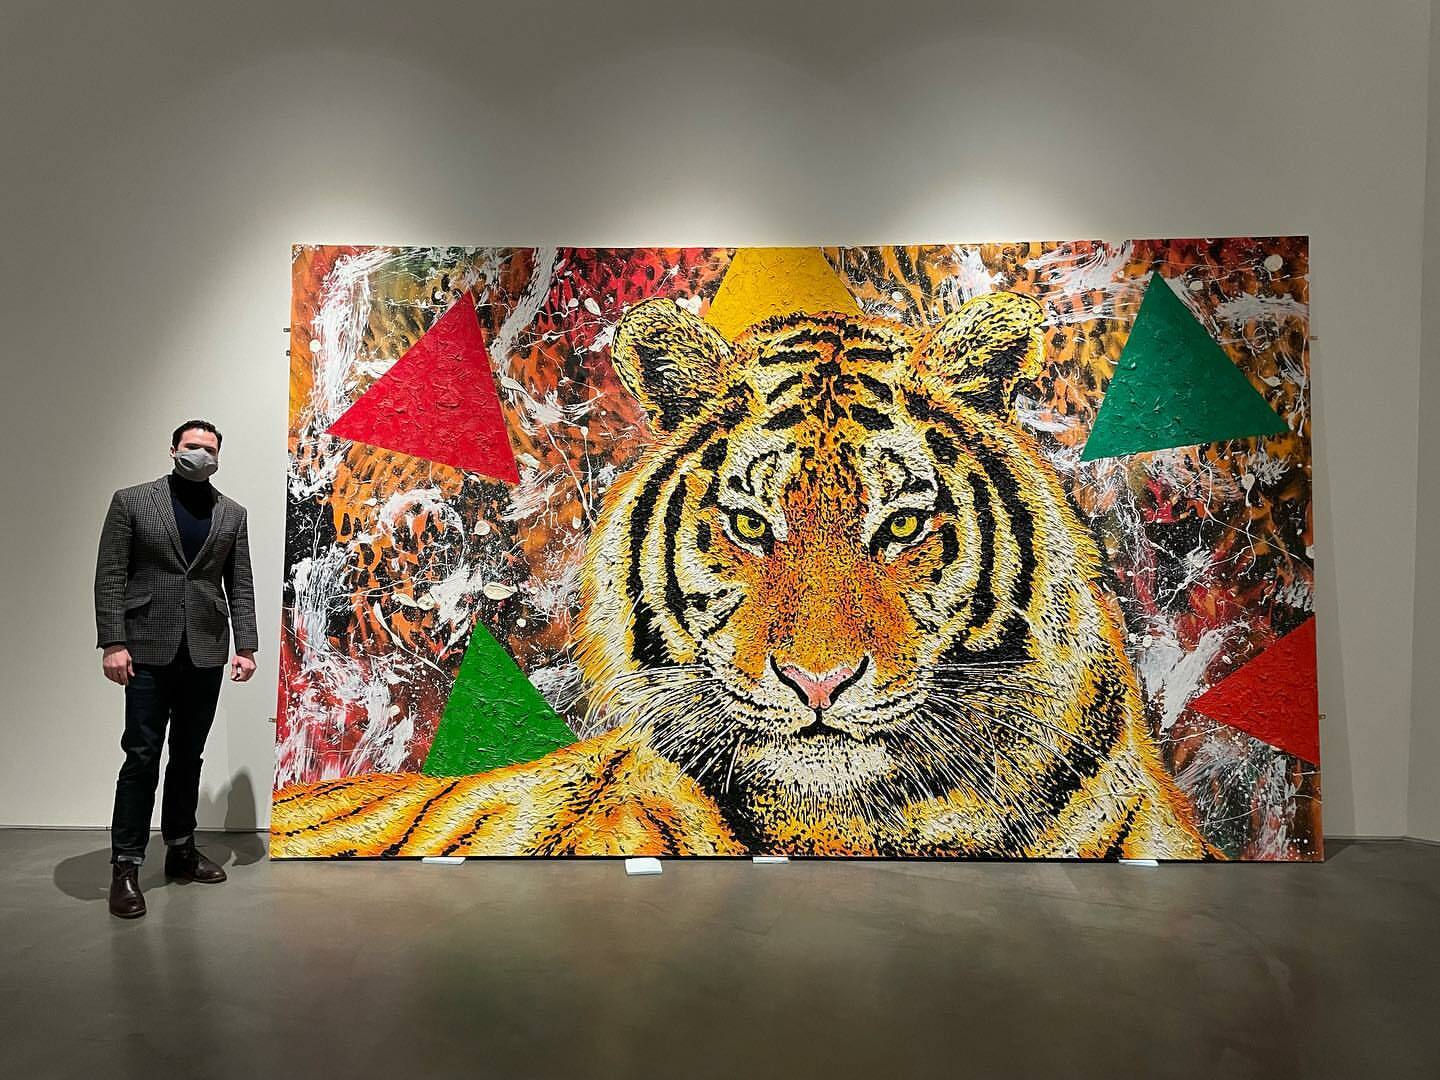 A man in a dark gray suit and black mask stands next to a large oil-painted mural. In the center, a large head of a tiger stares forward with bright yellow eyes. Abstract lines and blotches of paint are in the background with large green and red triangles